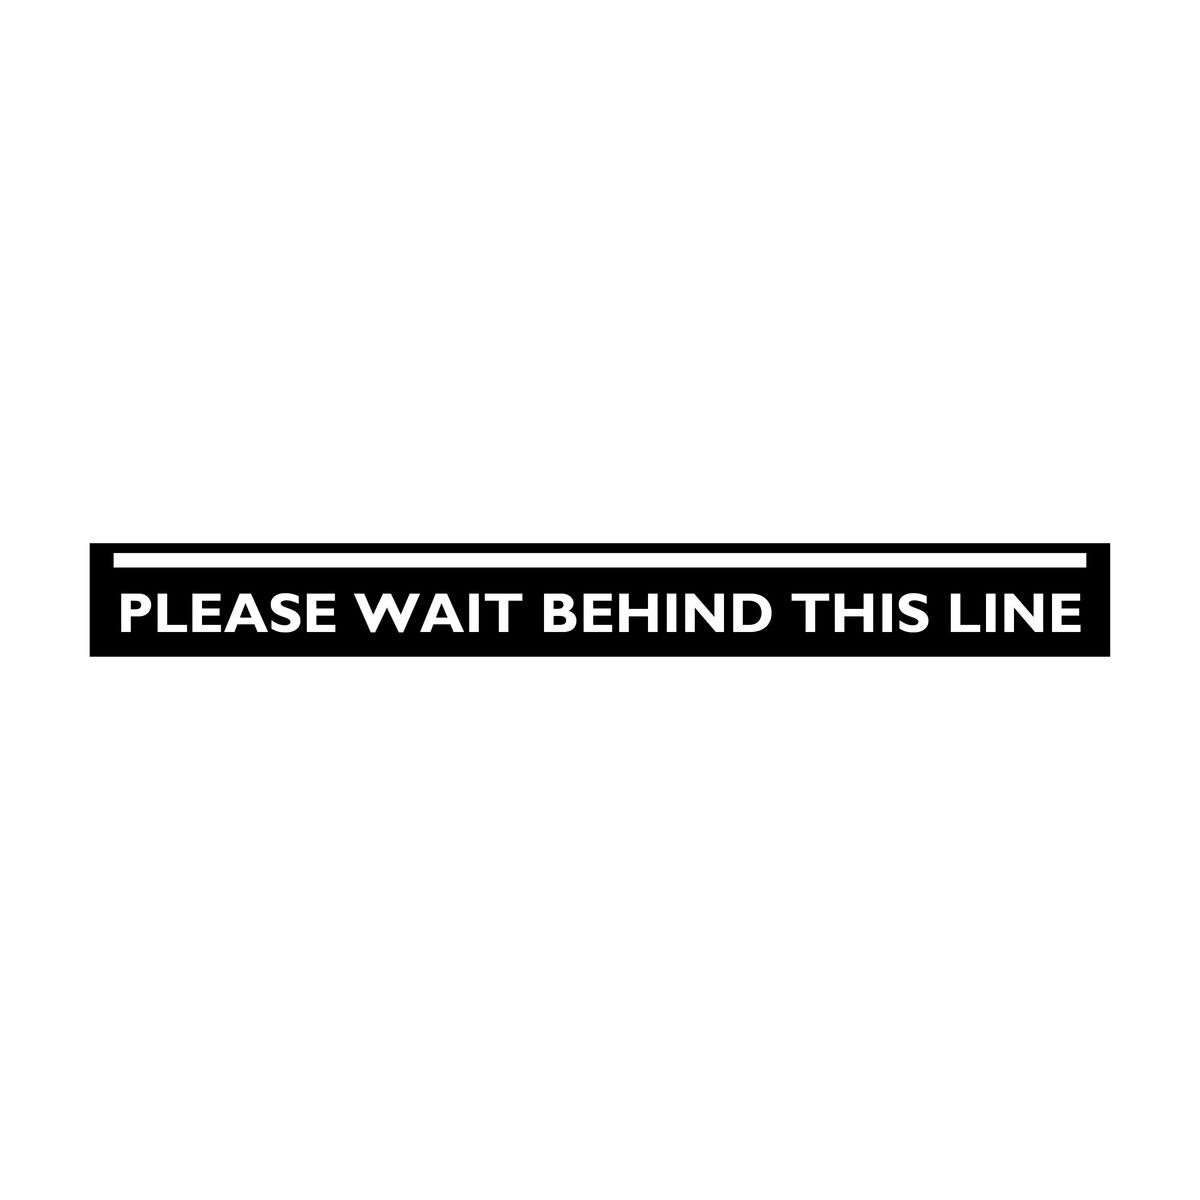 Stay Behind Line Example